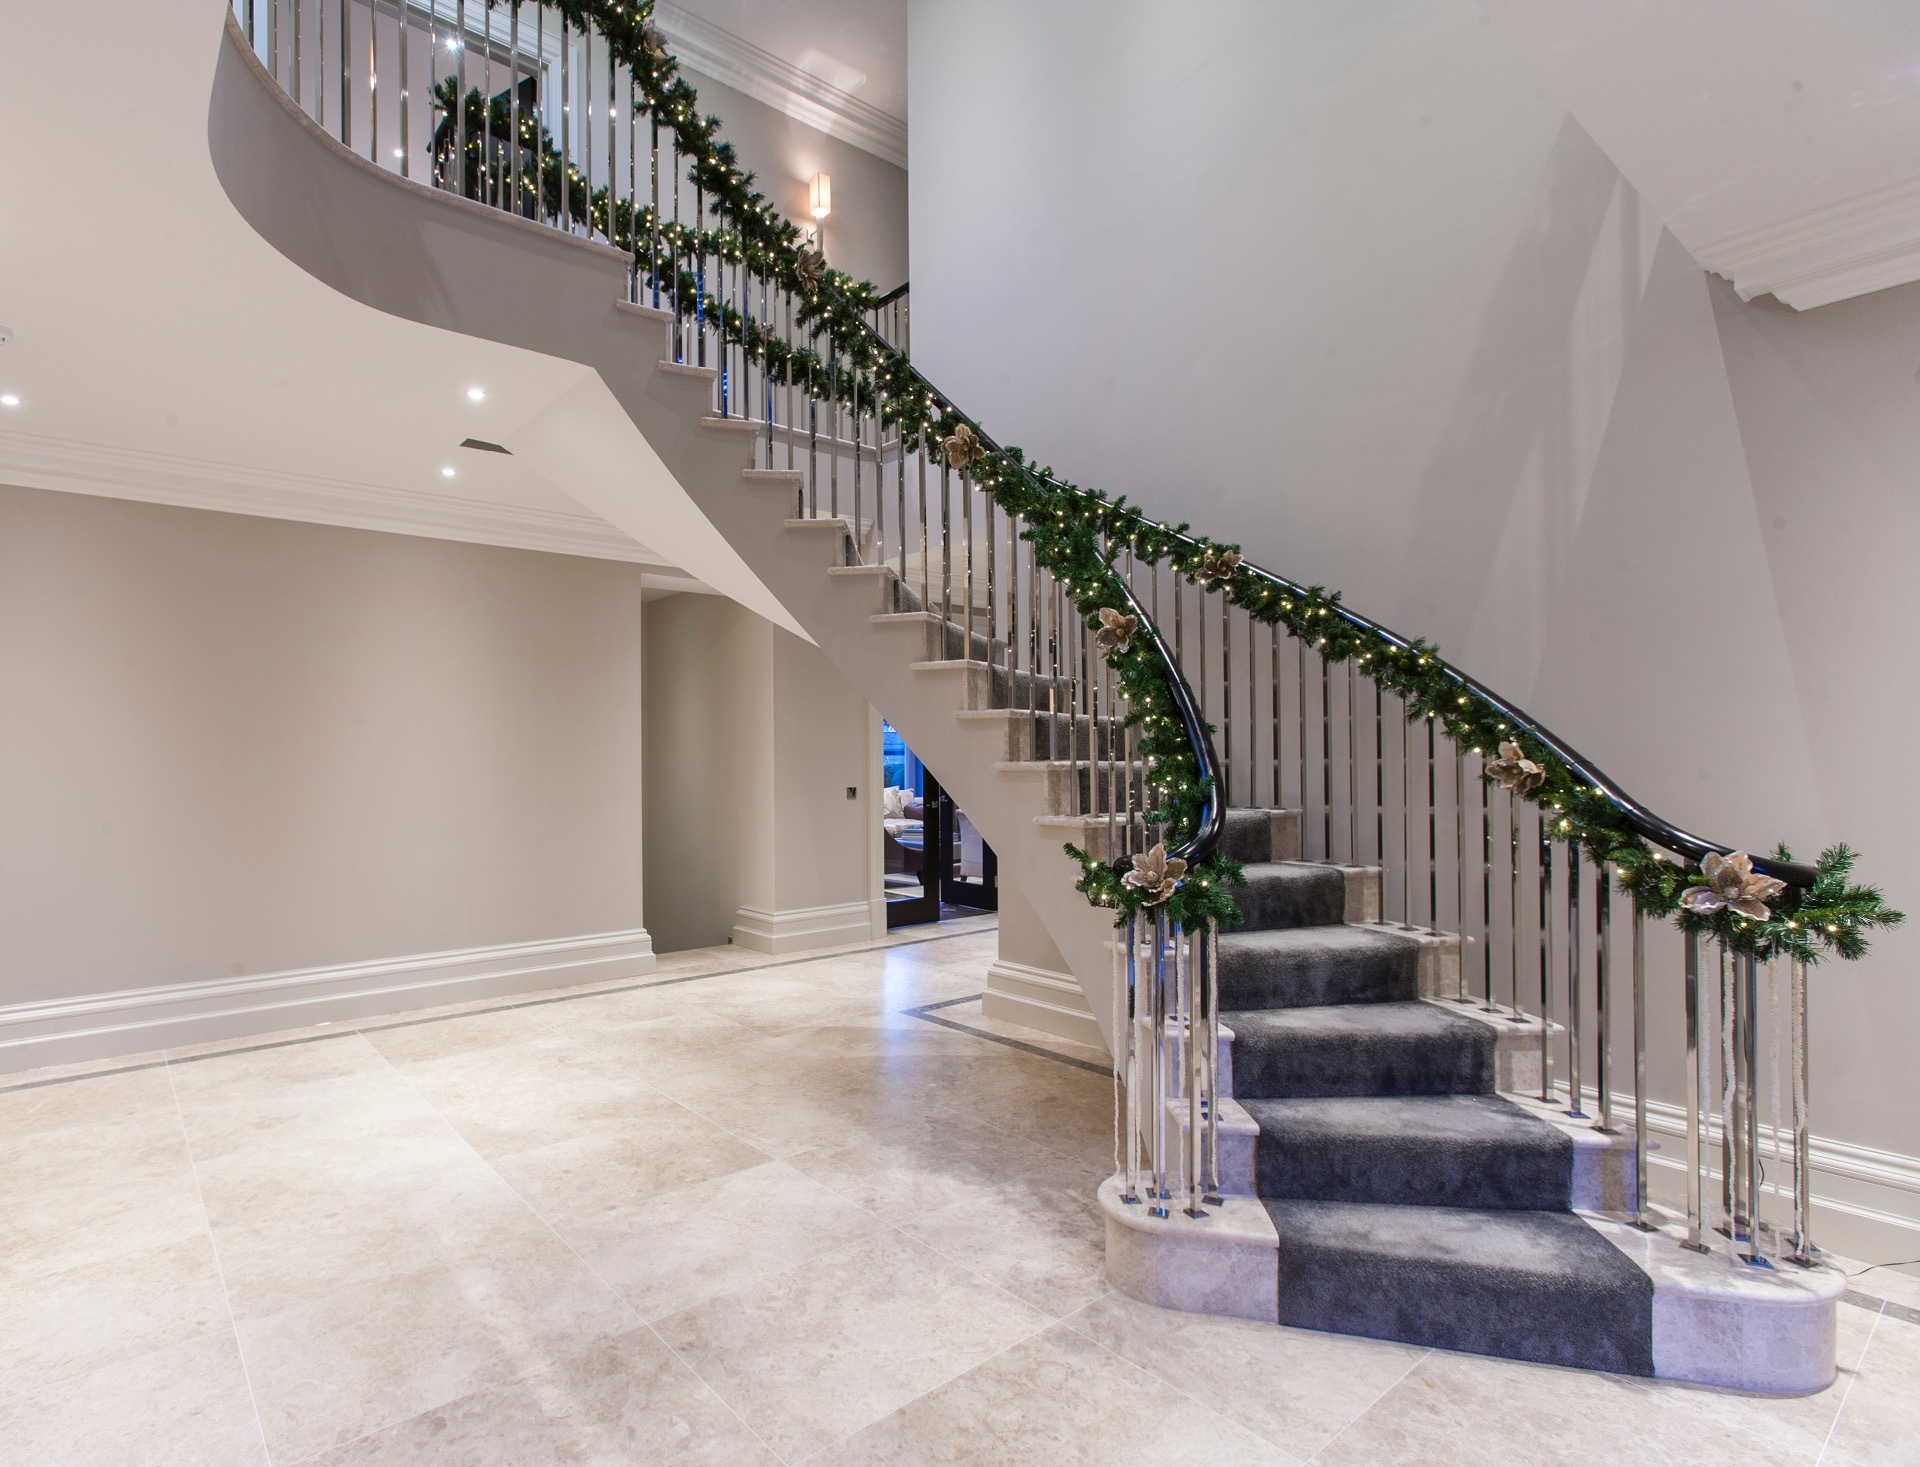 HOW TO BUILD MODERN CURVED STAIRS IN 7 STEPS